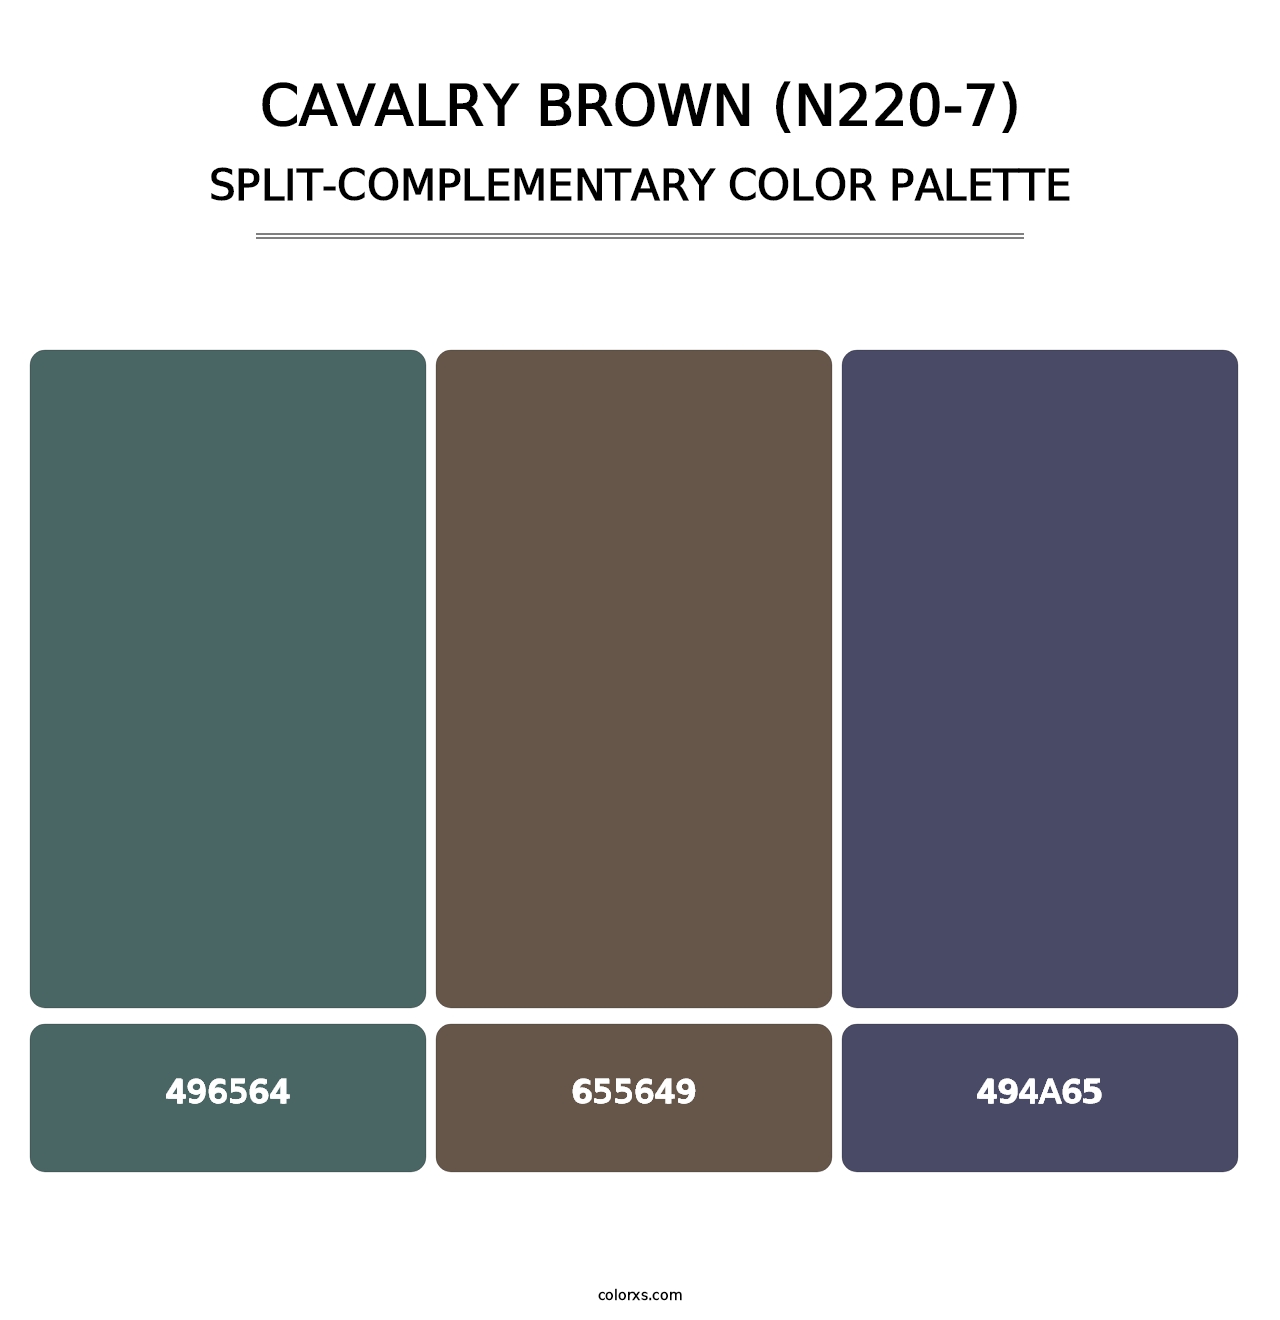 Cavalry Brown (N220-7) - Split-Complementary Color Palette